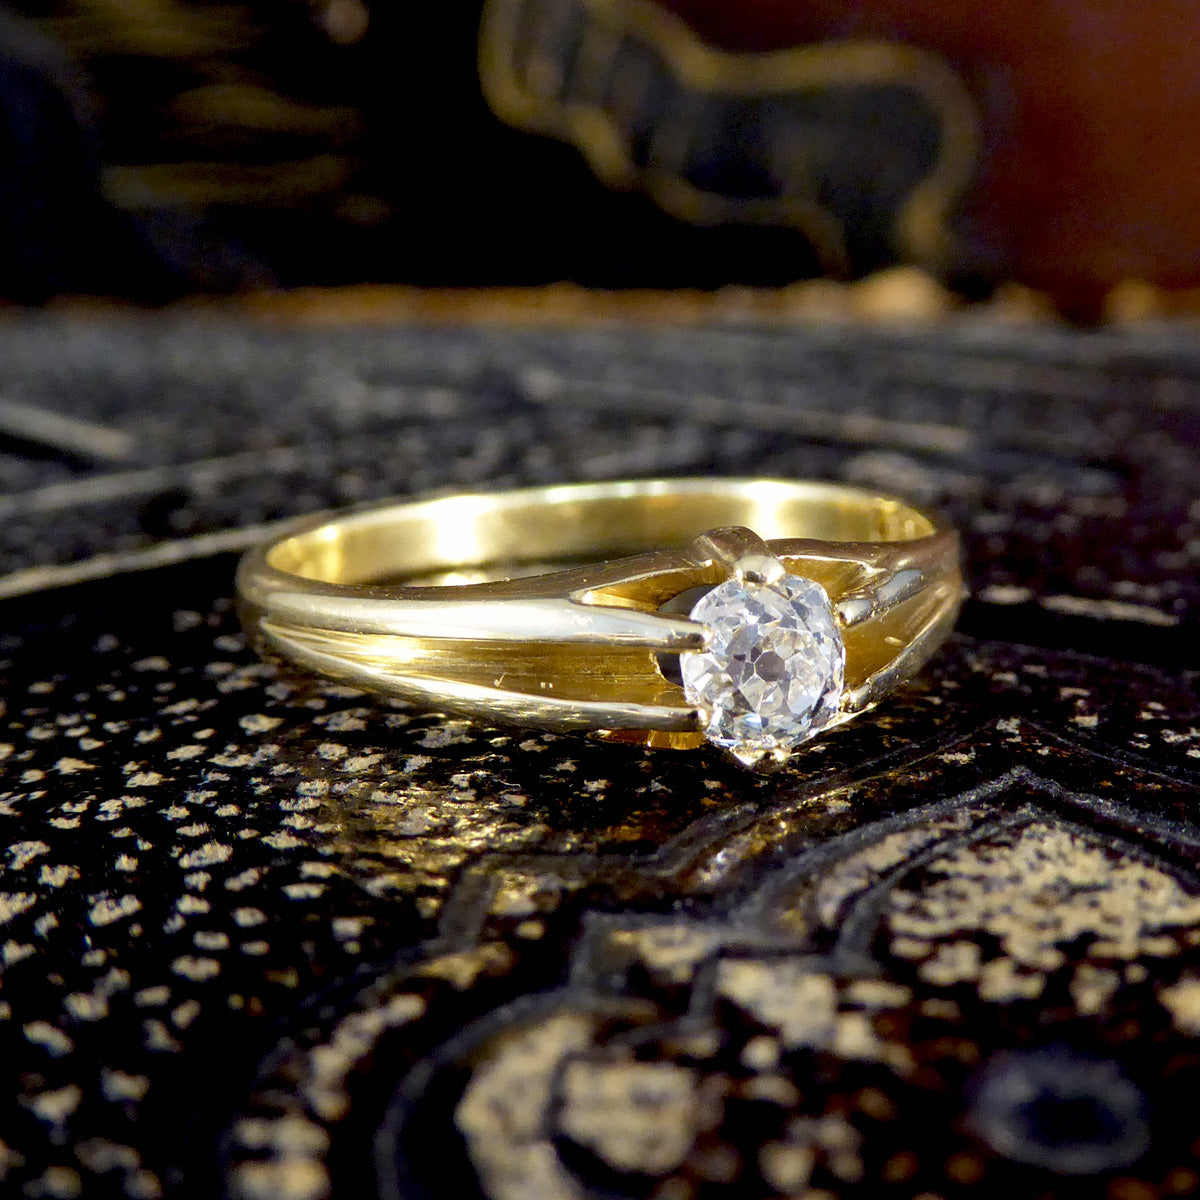 Late Victorian Old Cushion Cut Diamond Belcher set Ring in 18ct Yellow Gold